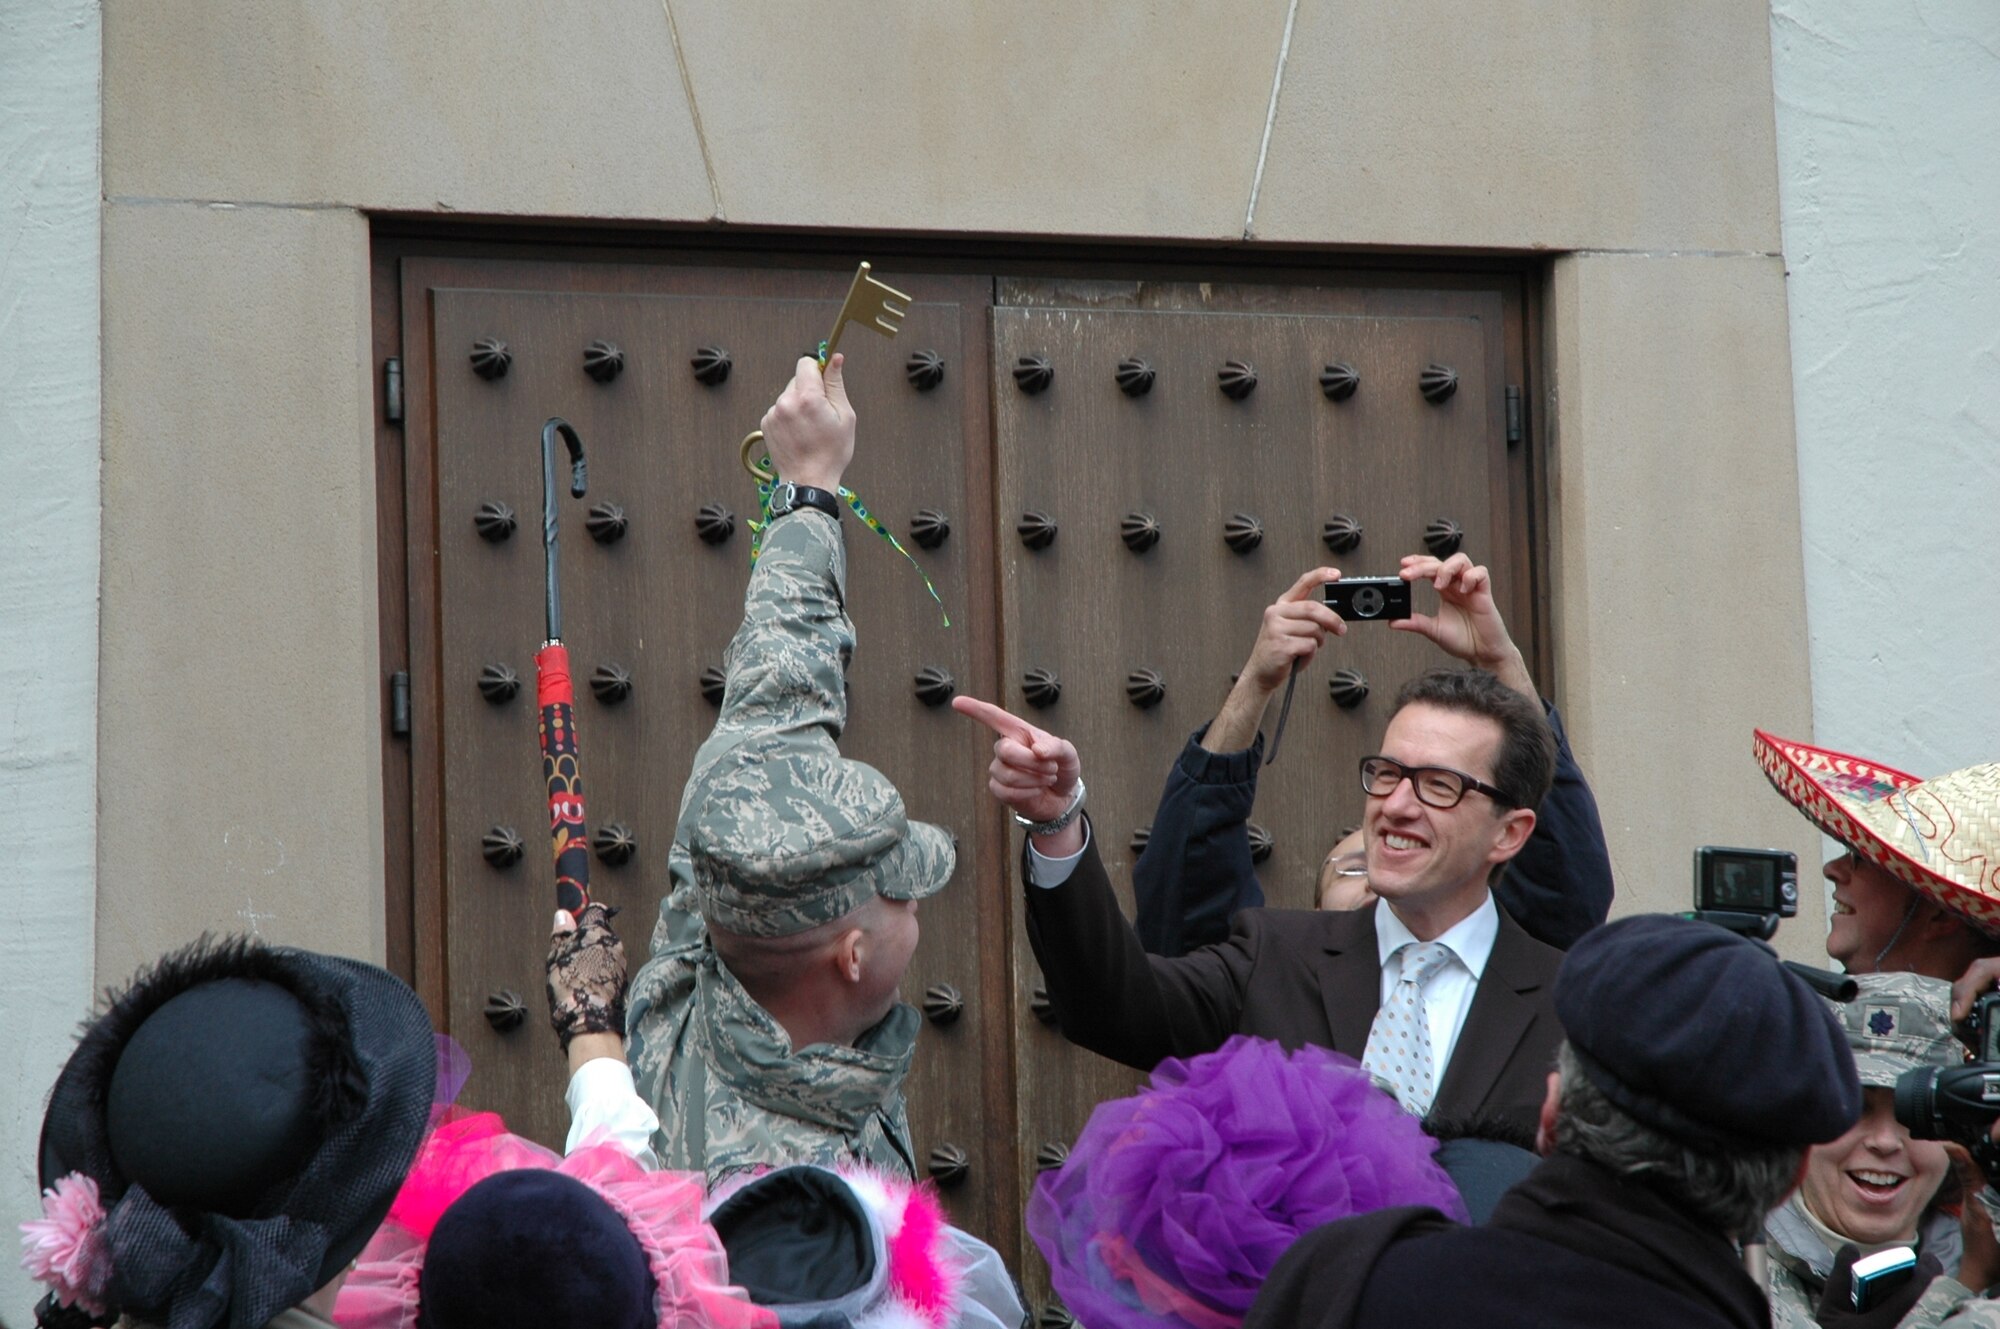 BITBURG, Germany -- Dr. Joachim Streit, mayor of Bitburg, points at the symbolic key that a base member holds up during this year’s Storming of the Rathaus fashing event in Bitburg, Feb. 19, 2009. Once the ladies get the key, they are in charge for the day. A group of base members from the 52nd Medical Group helped the mayor defend the city from the ladies on Fat Thursday. (U.S. Air Force photo by Iris Reiff)